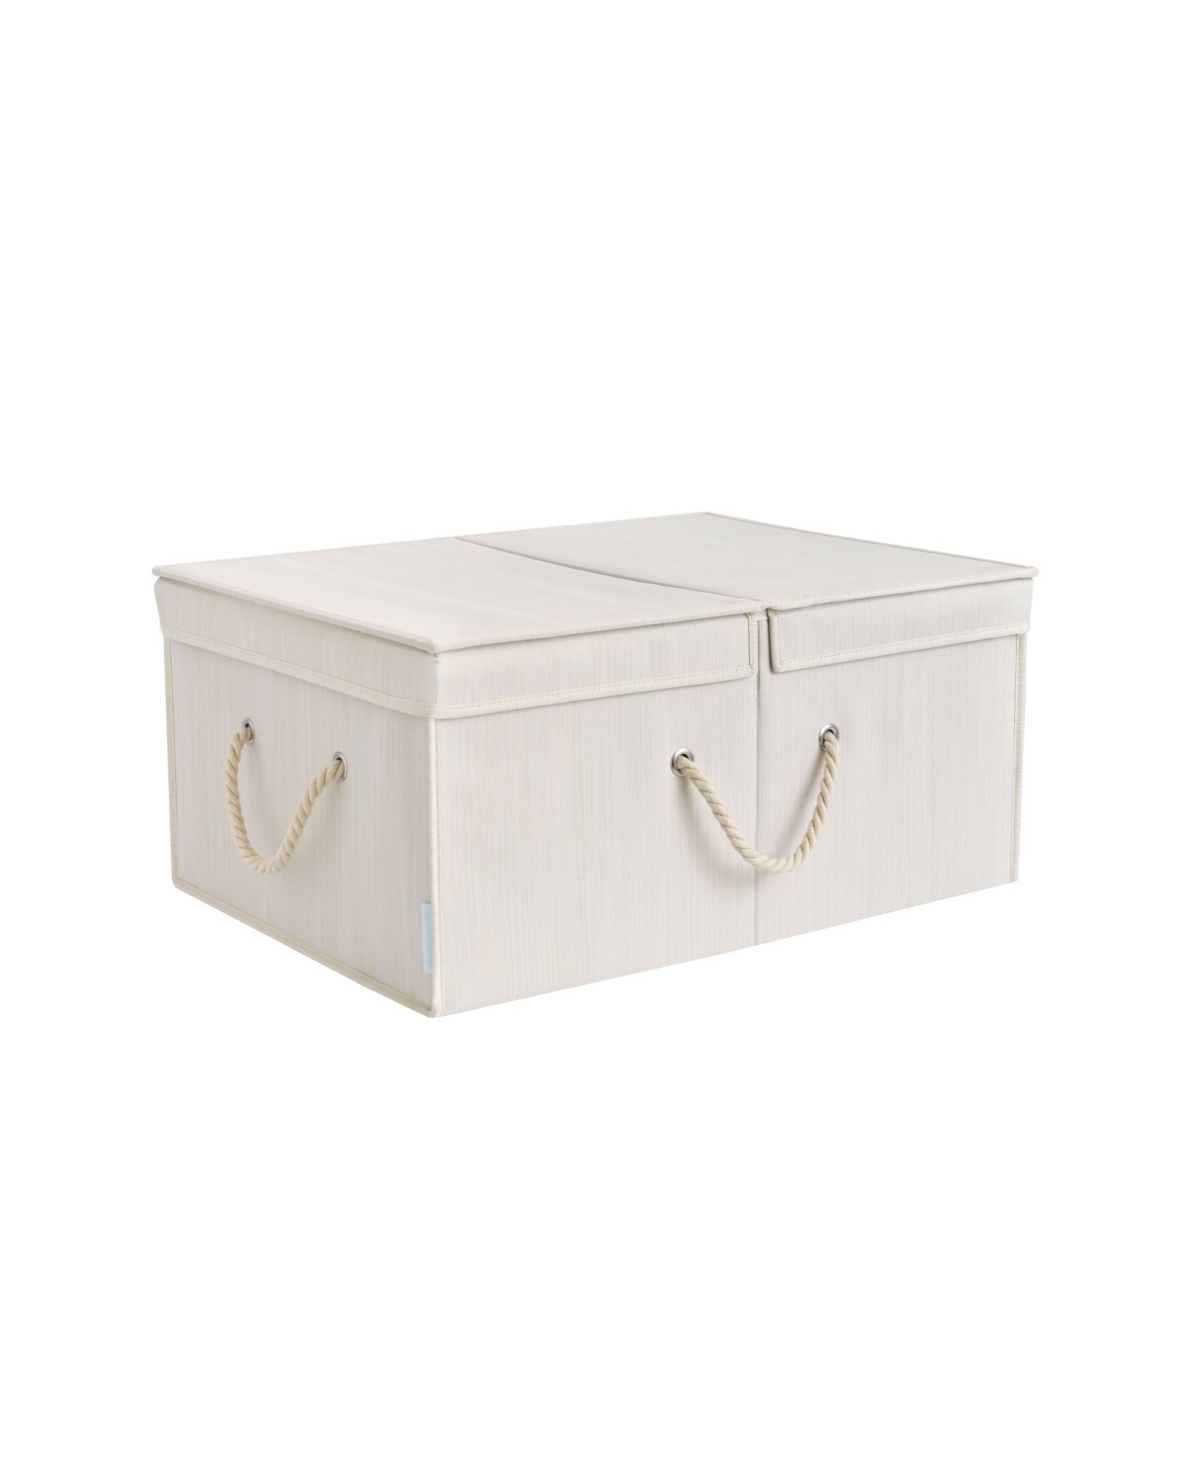 Wethinkstorage 65 Litre Collapsible Fabric Storage Bin With Double-open Lid And Cotton Rope Handles In Ivory